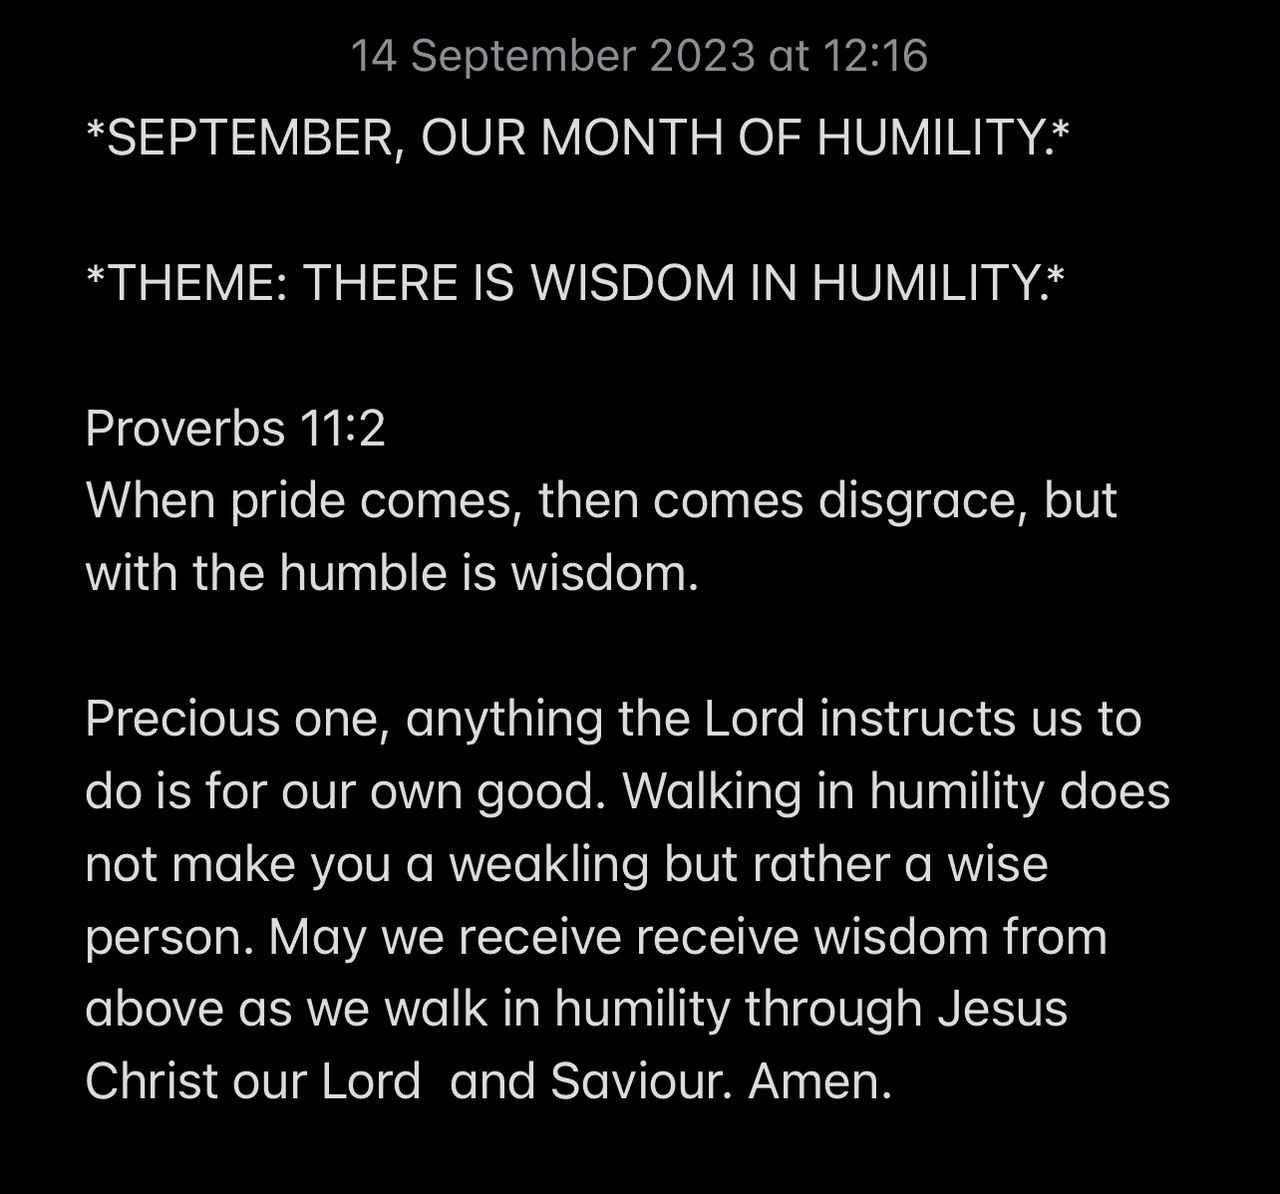 THERE IS WISDOM IN HUMILITY.